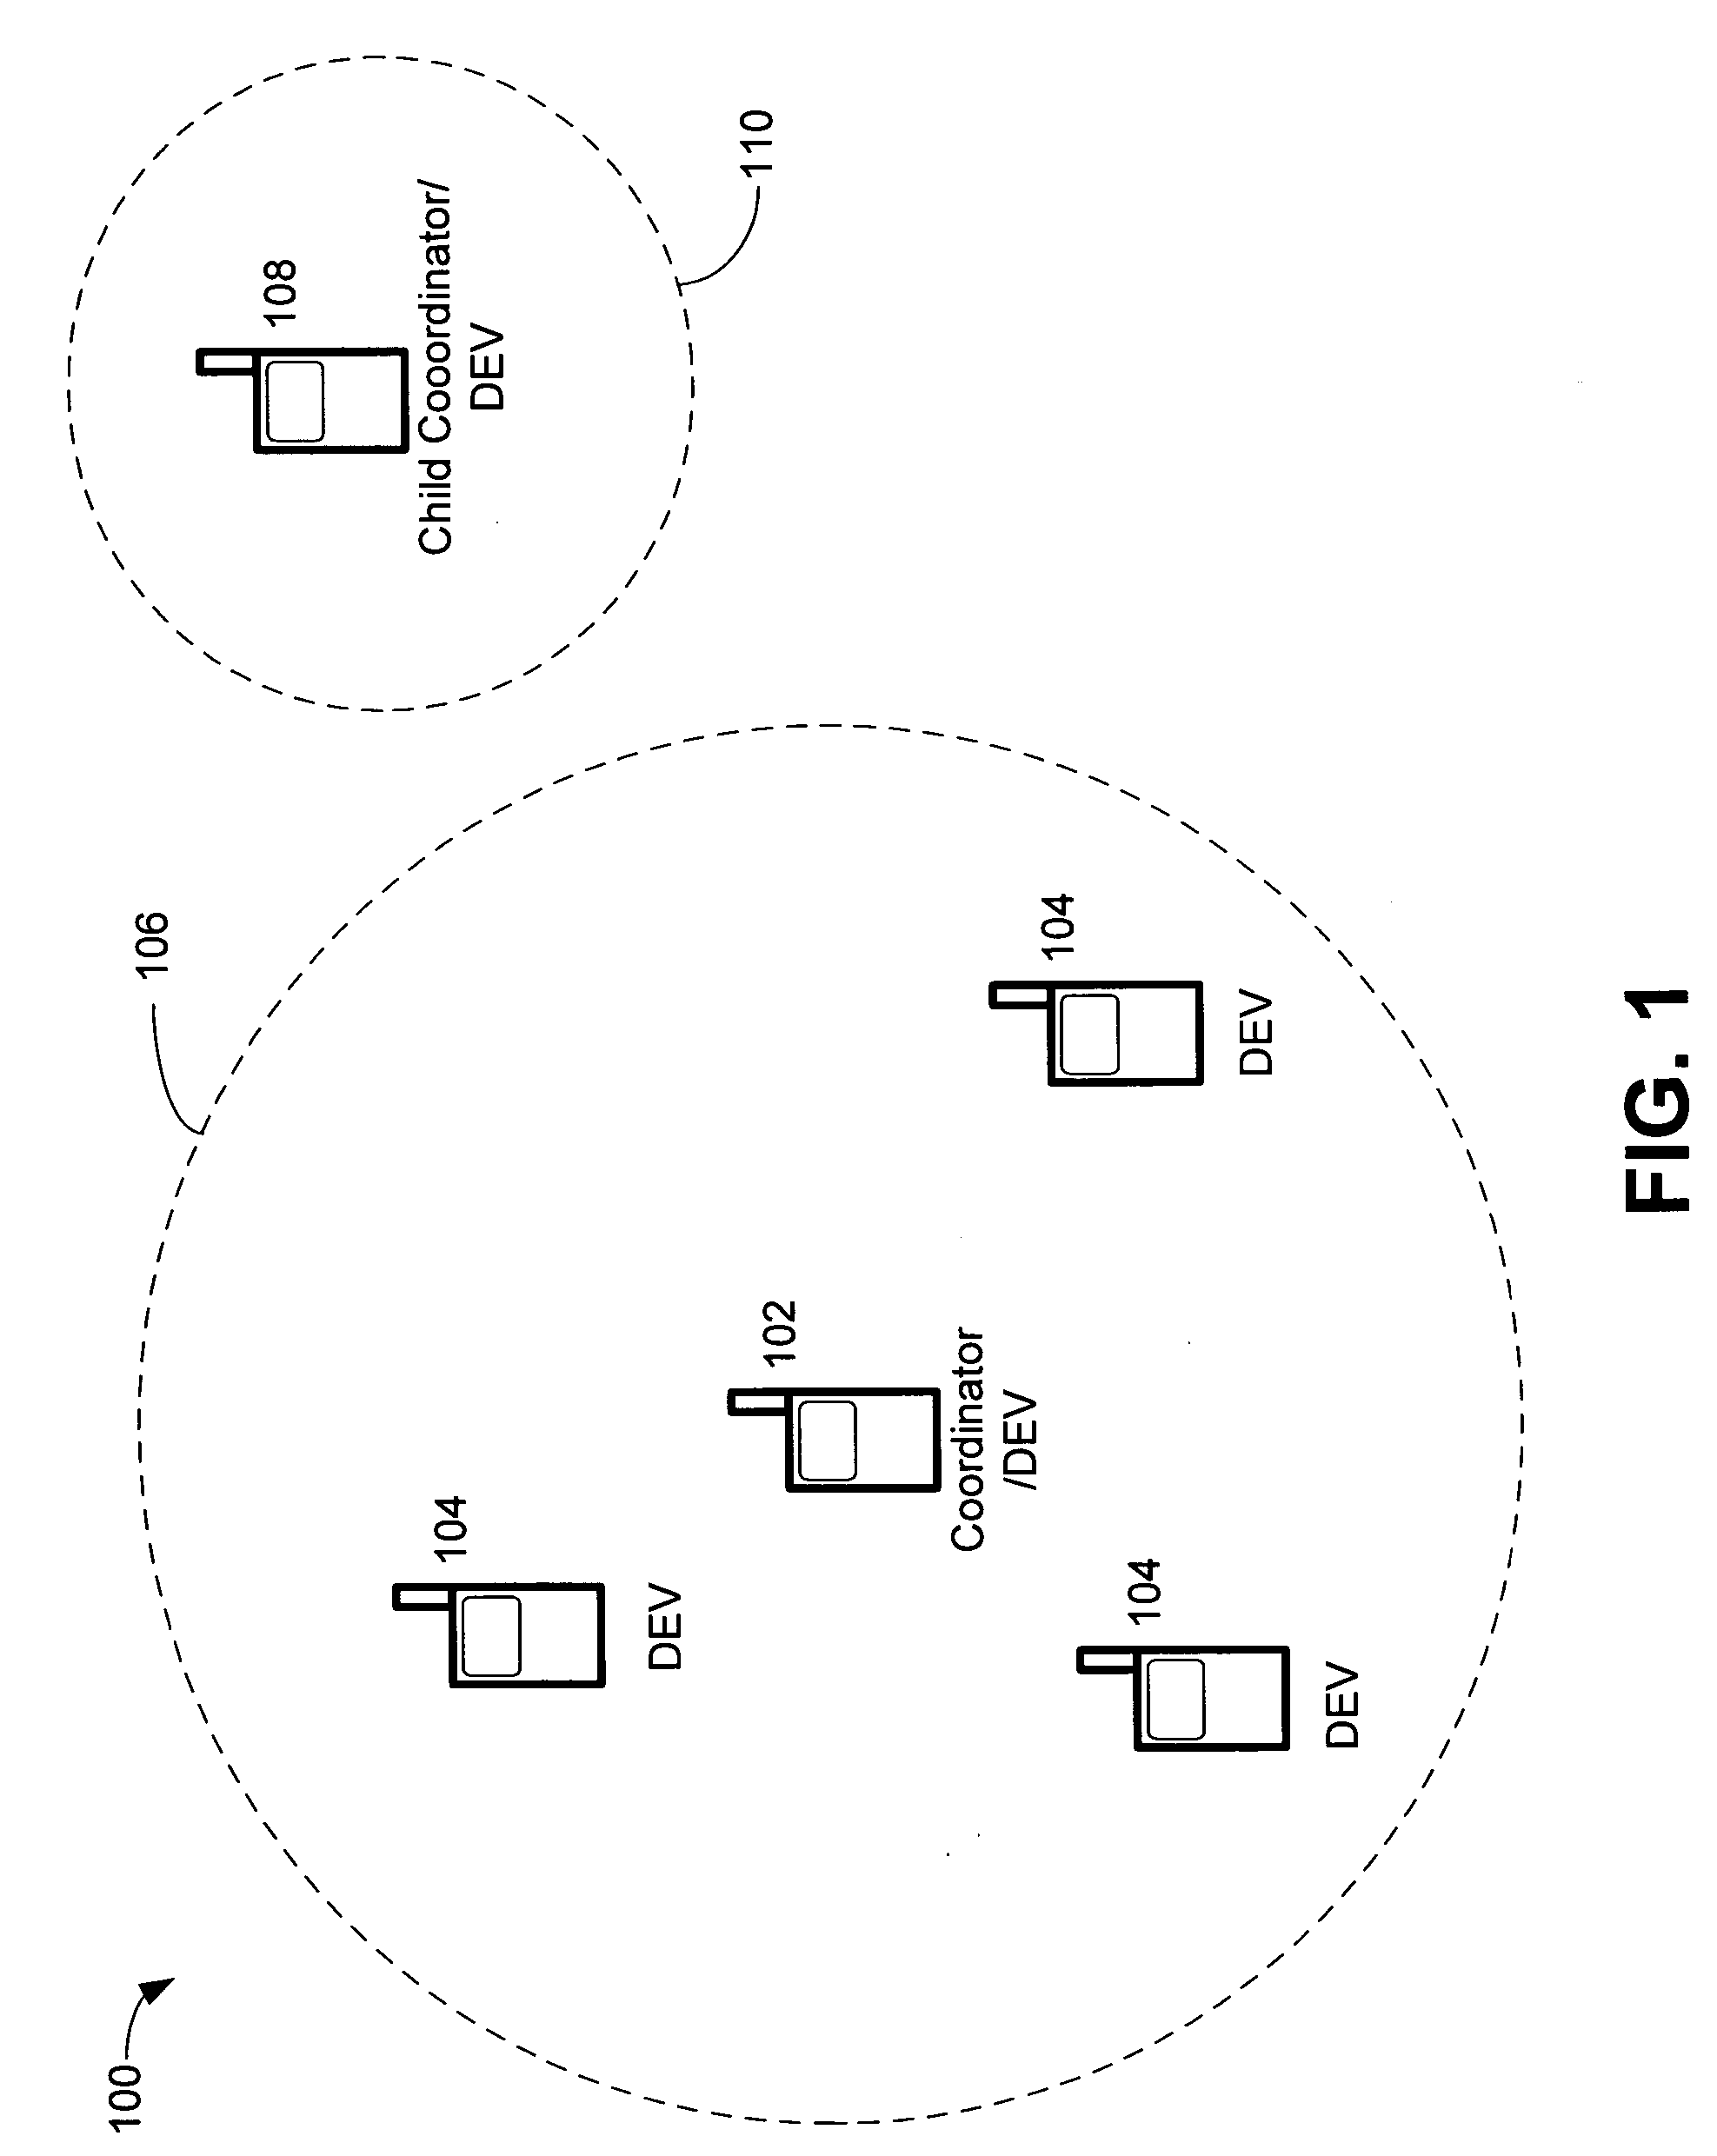 Method and system for power-based control of an ad hoc wireless communications network